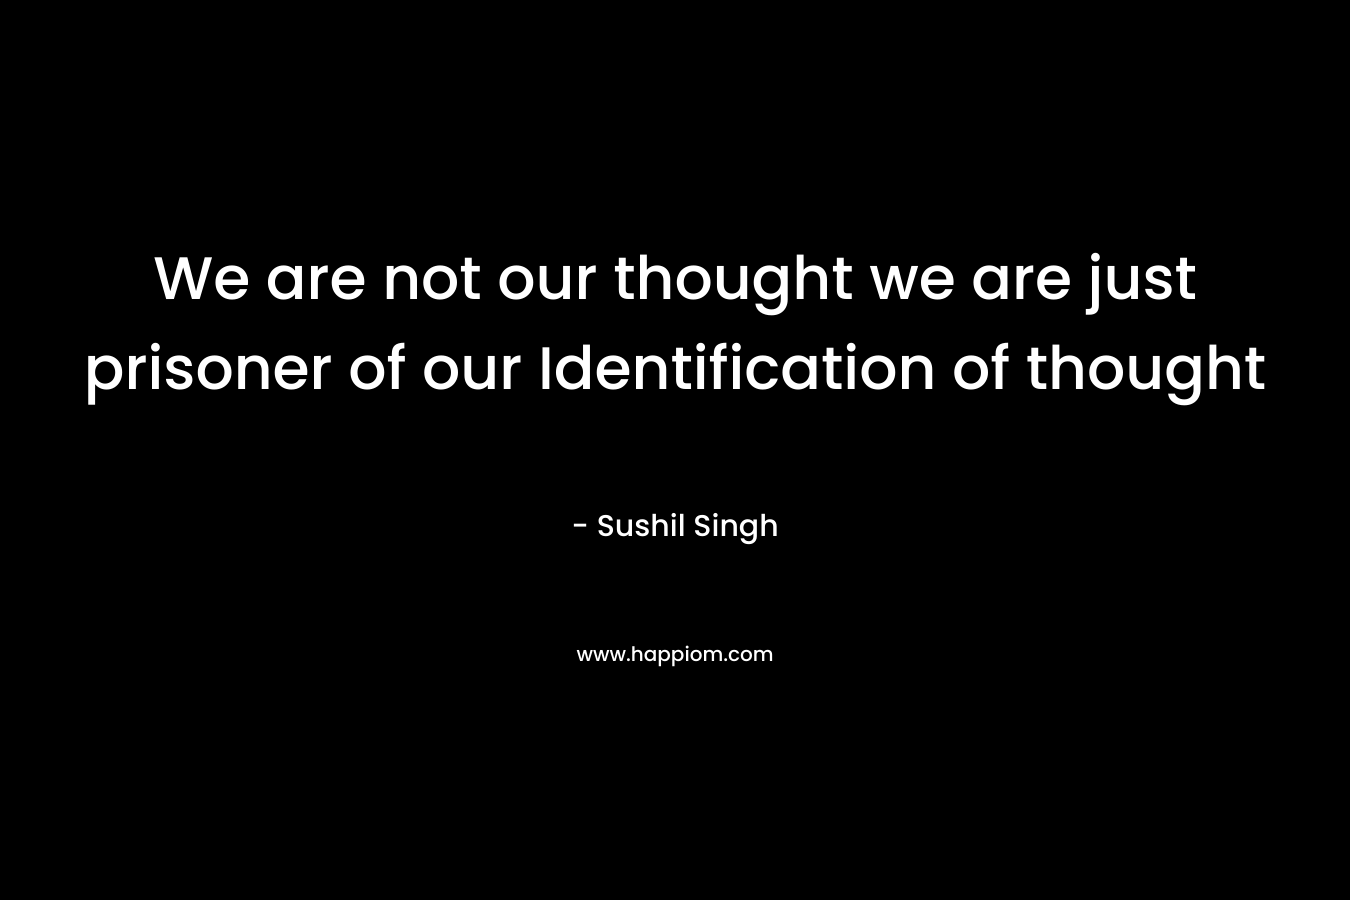 We are not our thought we are just prisoner of our Identification of thought